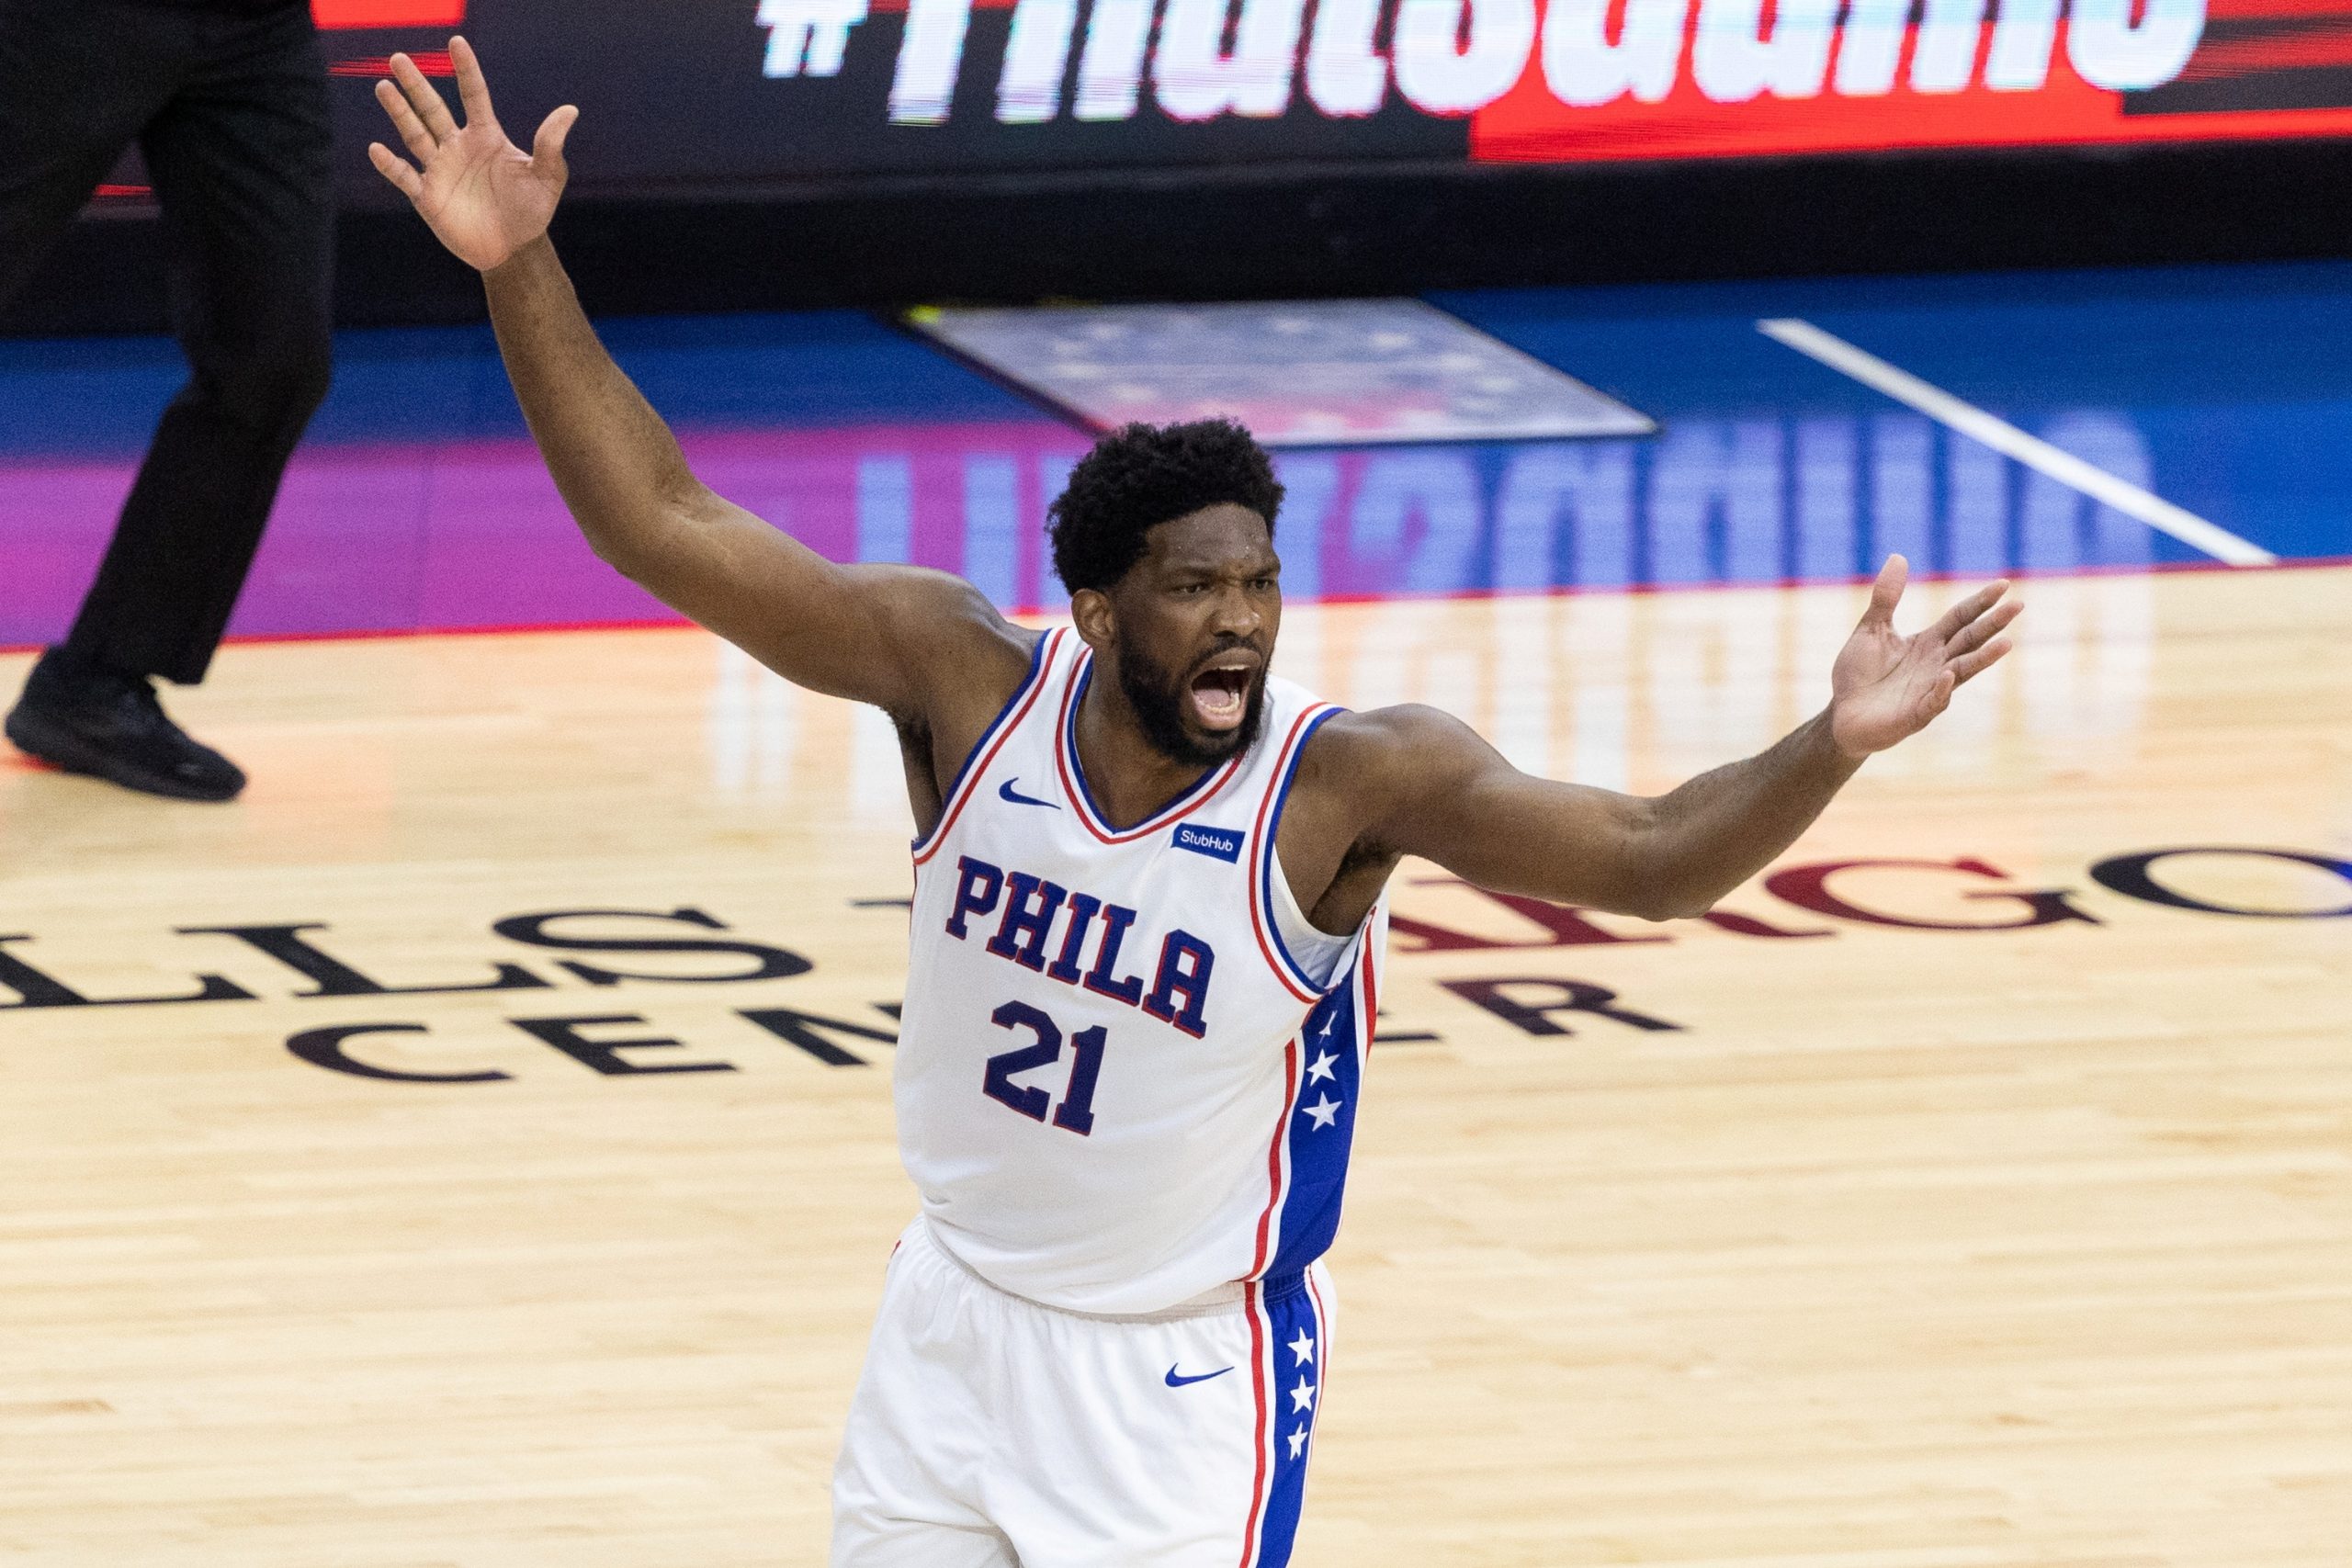 FILE PHOTO: NBA: Playoffs-Atlanta Hawks at Philadelphia 76ers FILE PHOTO: Jun 20, 2021; Philadelphia, Pennsylvania, USA; Philadelphia 76ers center Joel Embiid (21) reacts after scoring against the Atlanta Hawks during the first quarter of game seven of the second round of the 2021 NBA Playoffs at Wells Fargo Center. Mandatory Credit: Bill Streicher-USA TODAY Sports/File Photo Bill Streicher